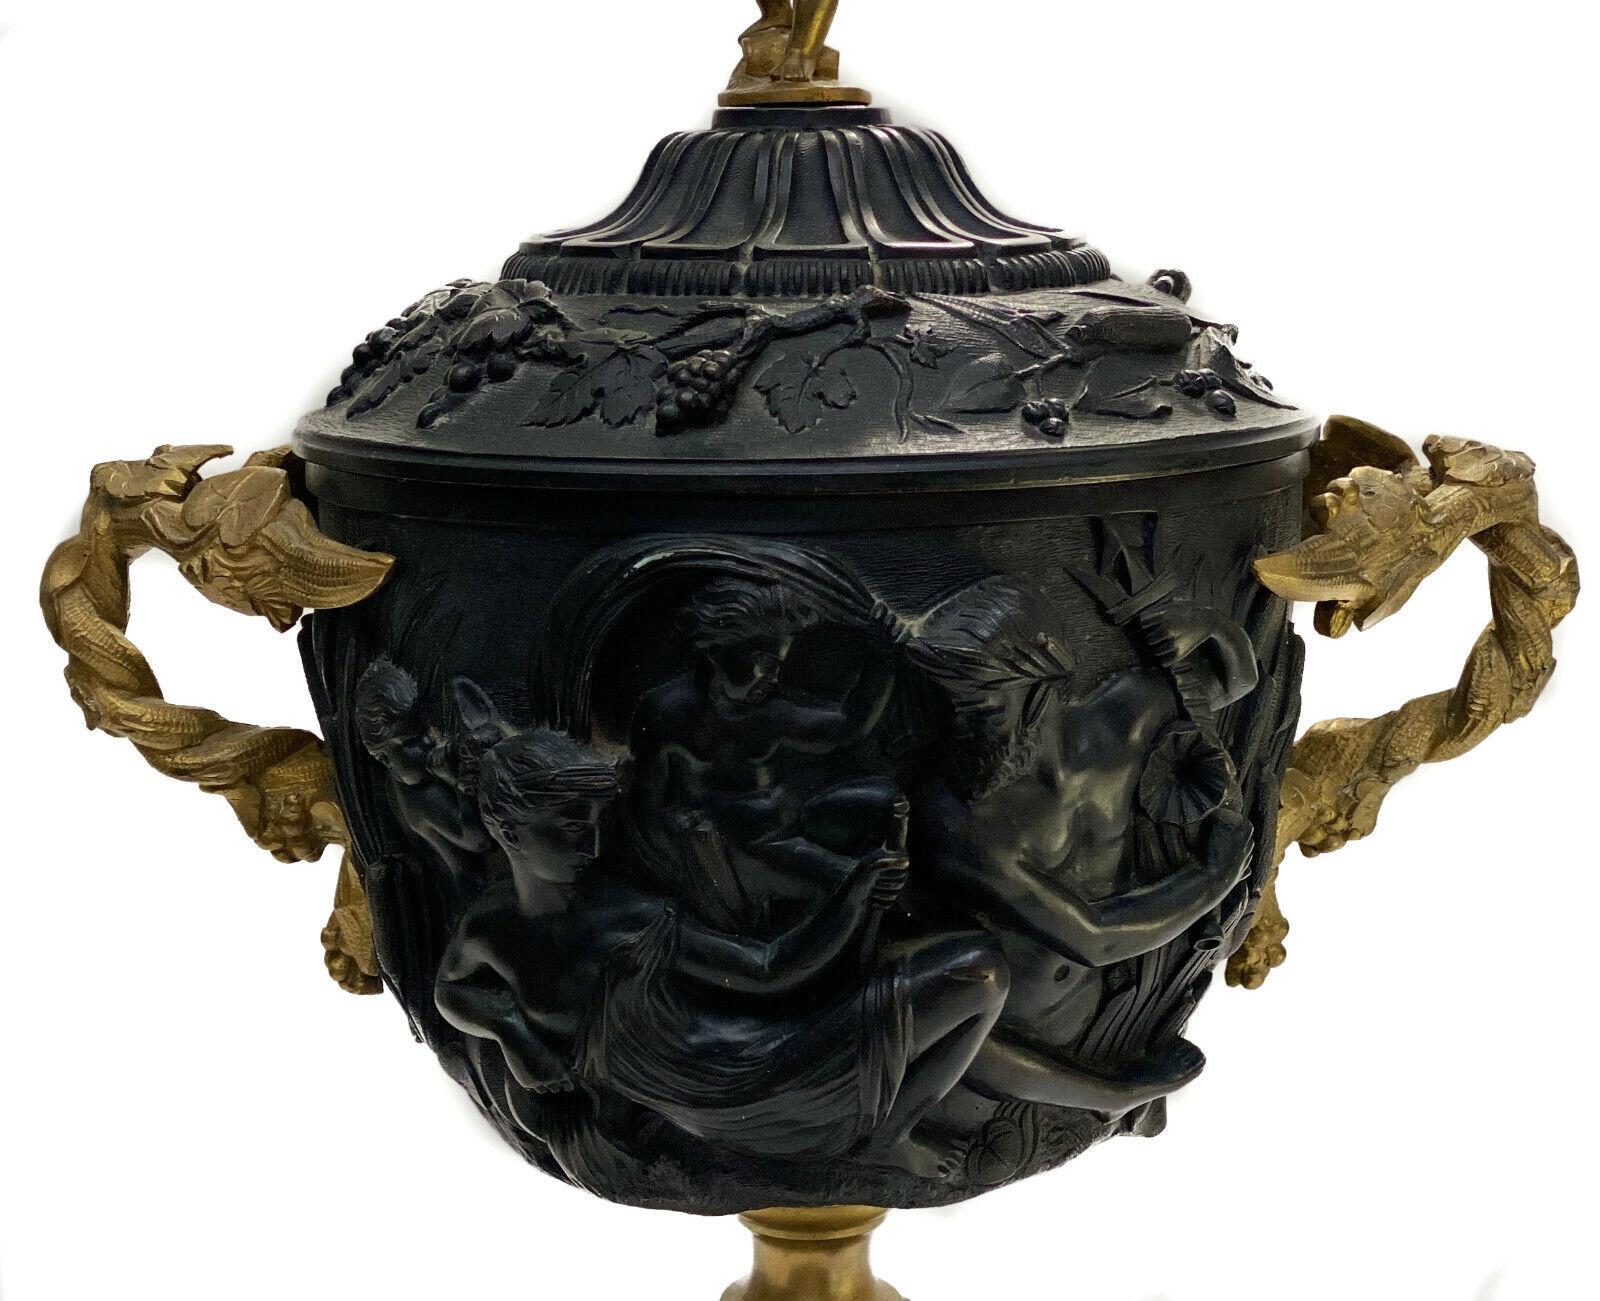 Continental Patinated & gilt bronze twin handled cup or urn with liner, c.1900

Figural cherubs to the exterior of the cup with gilt leaf handles. A cherub to the finial of the lid. Mounted on a marble base. Likely French.

Additional